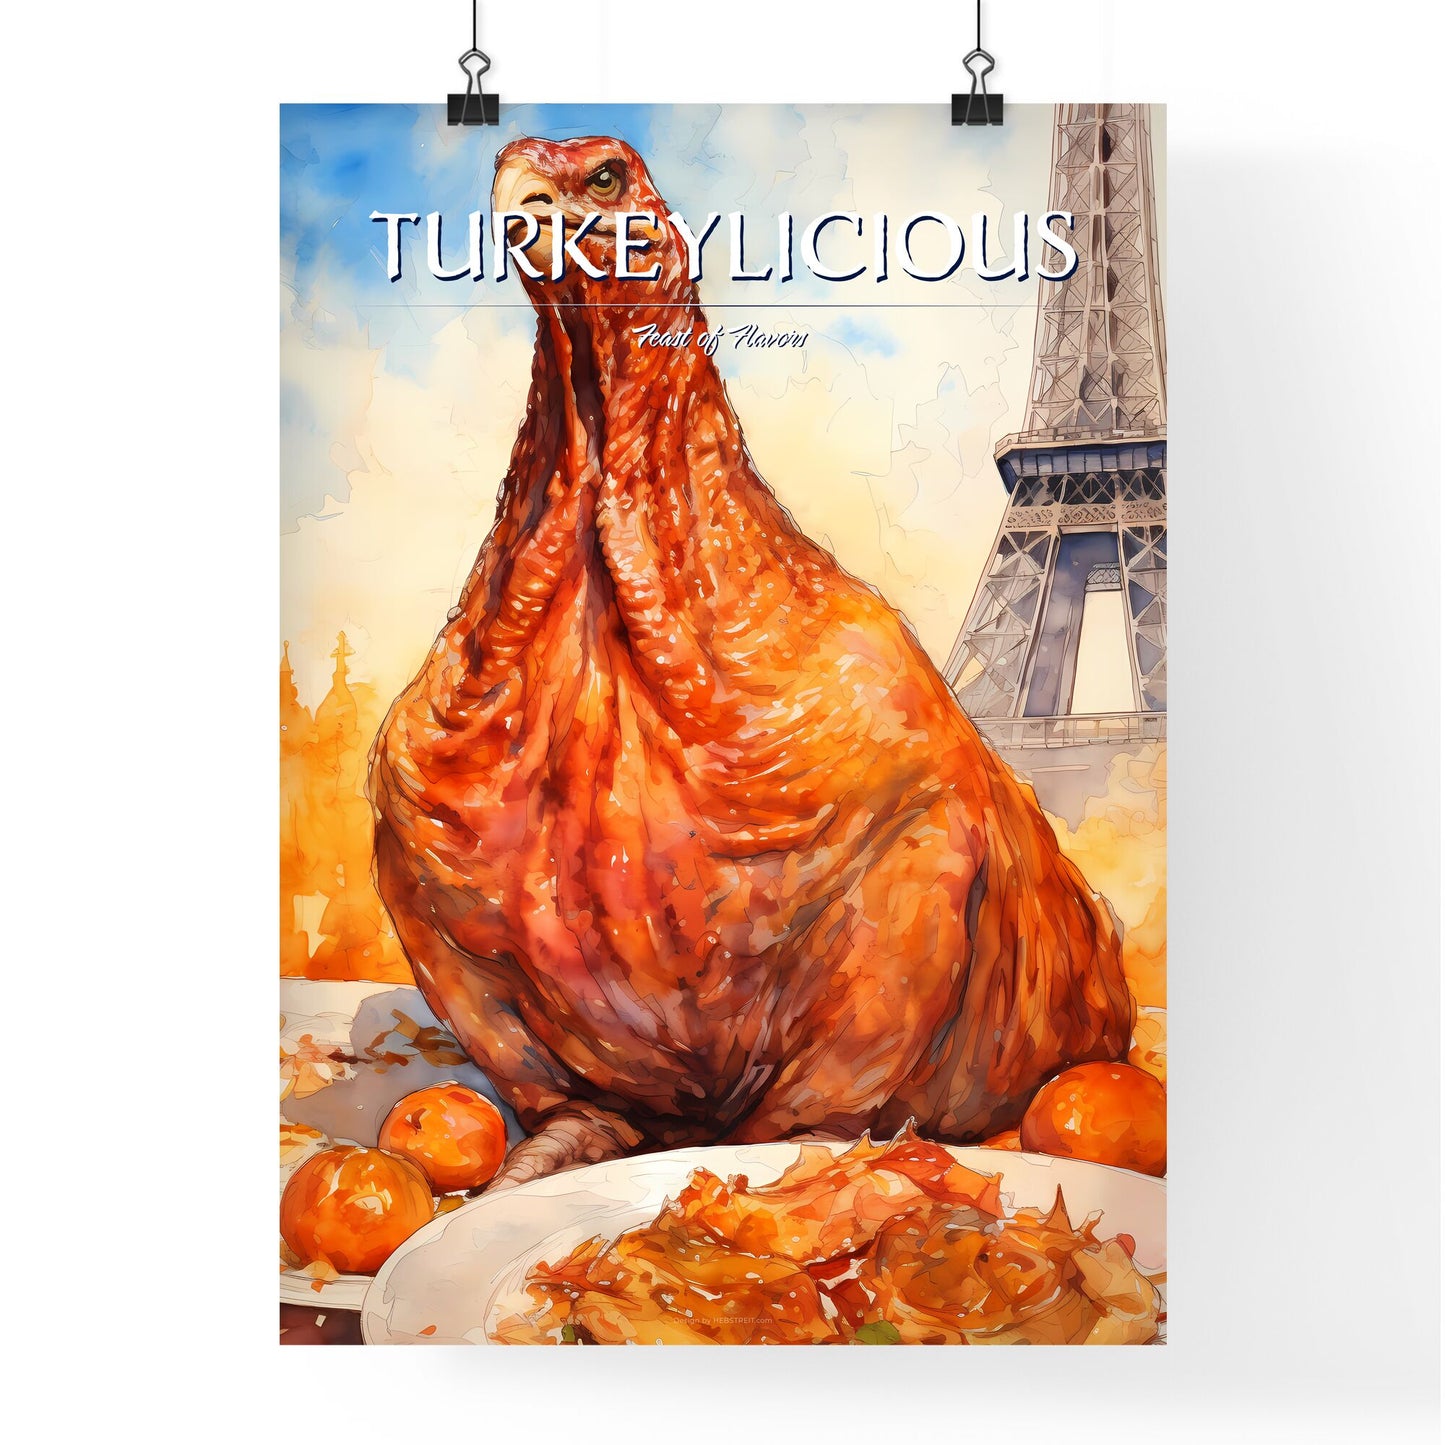 A Poster of Thanksgiving turkey - A Chicken With A Large Head And A Large Head With Oranges Default Title